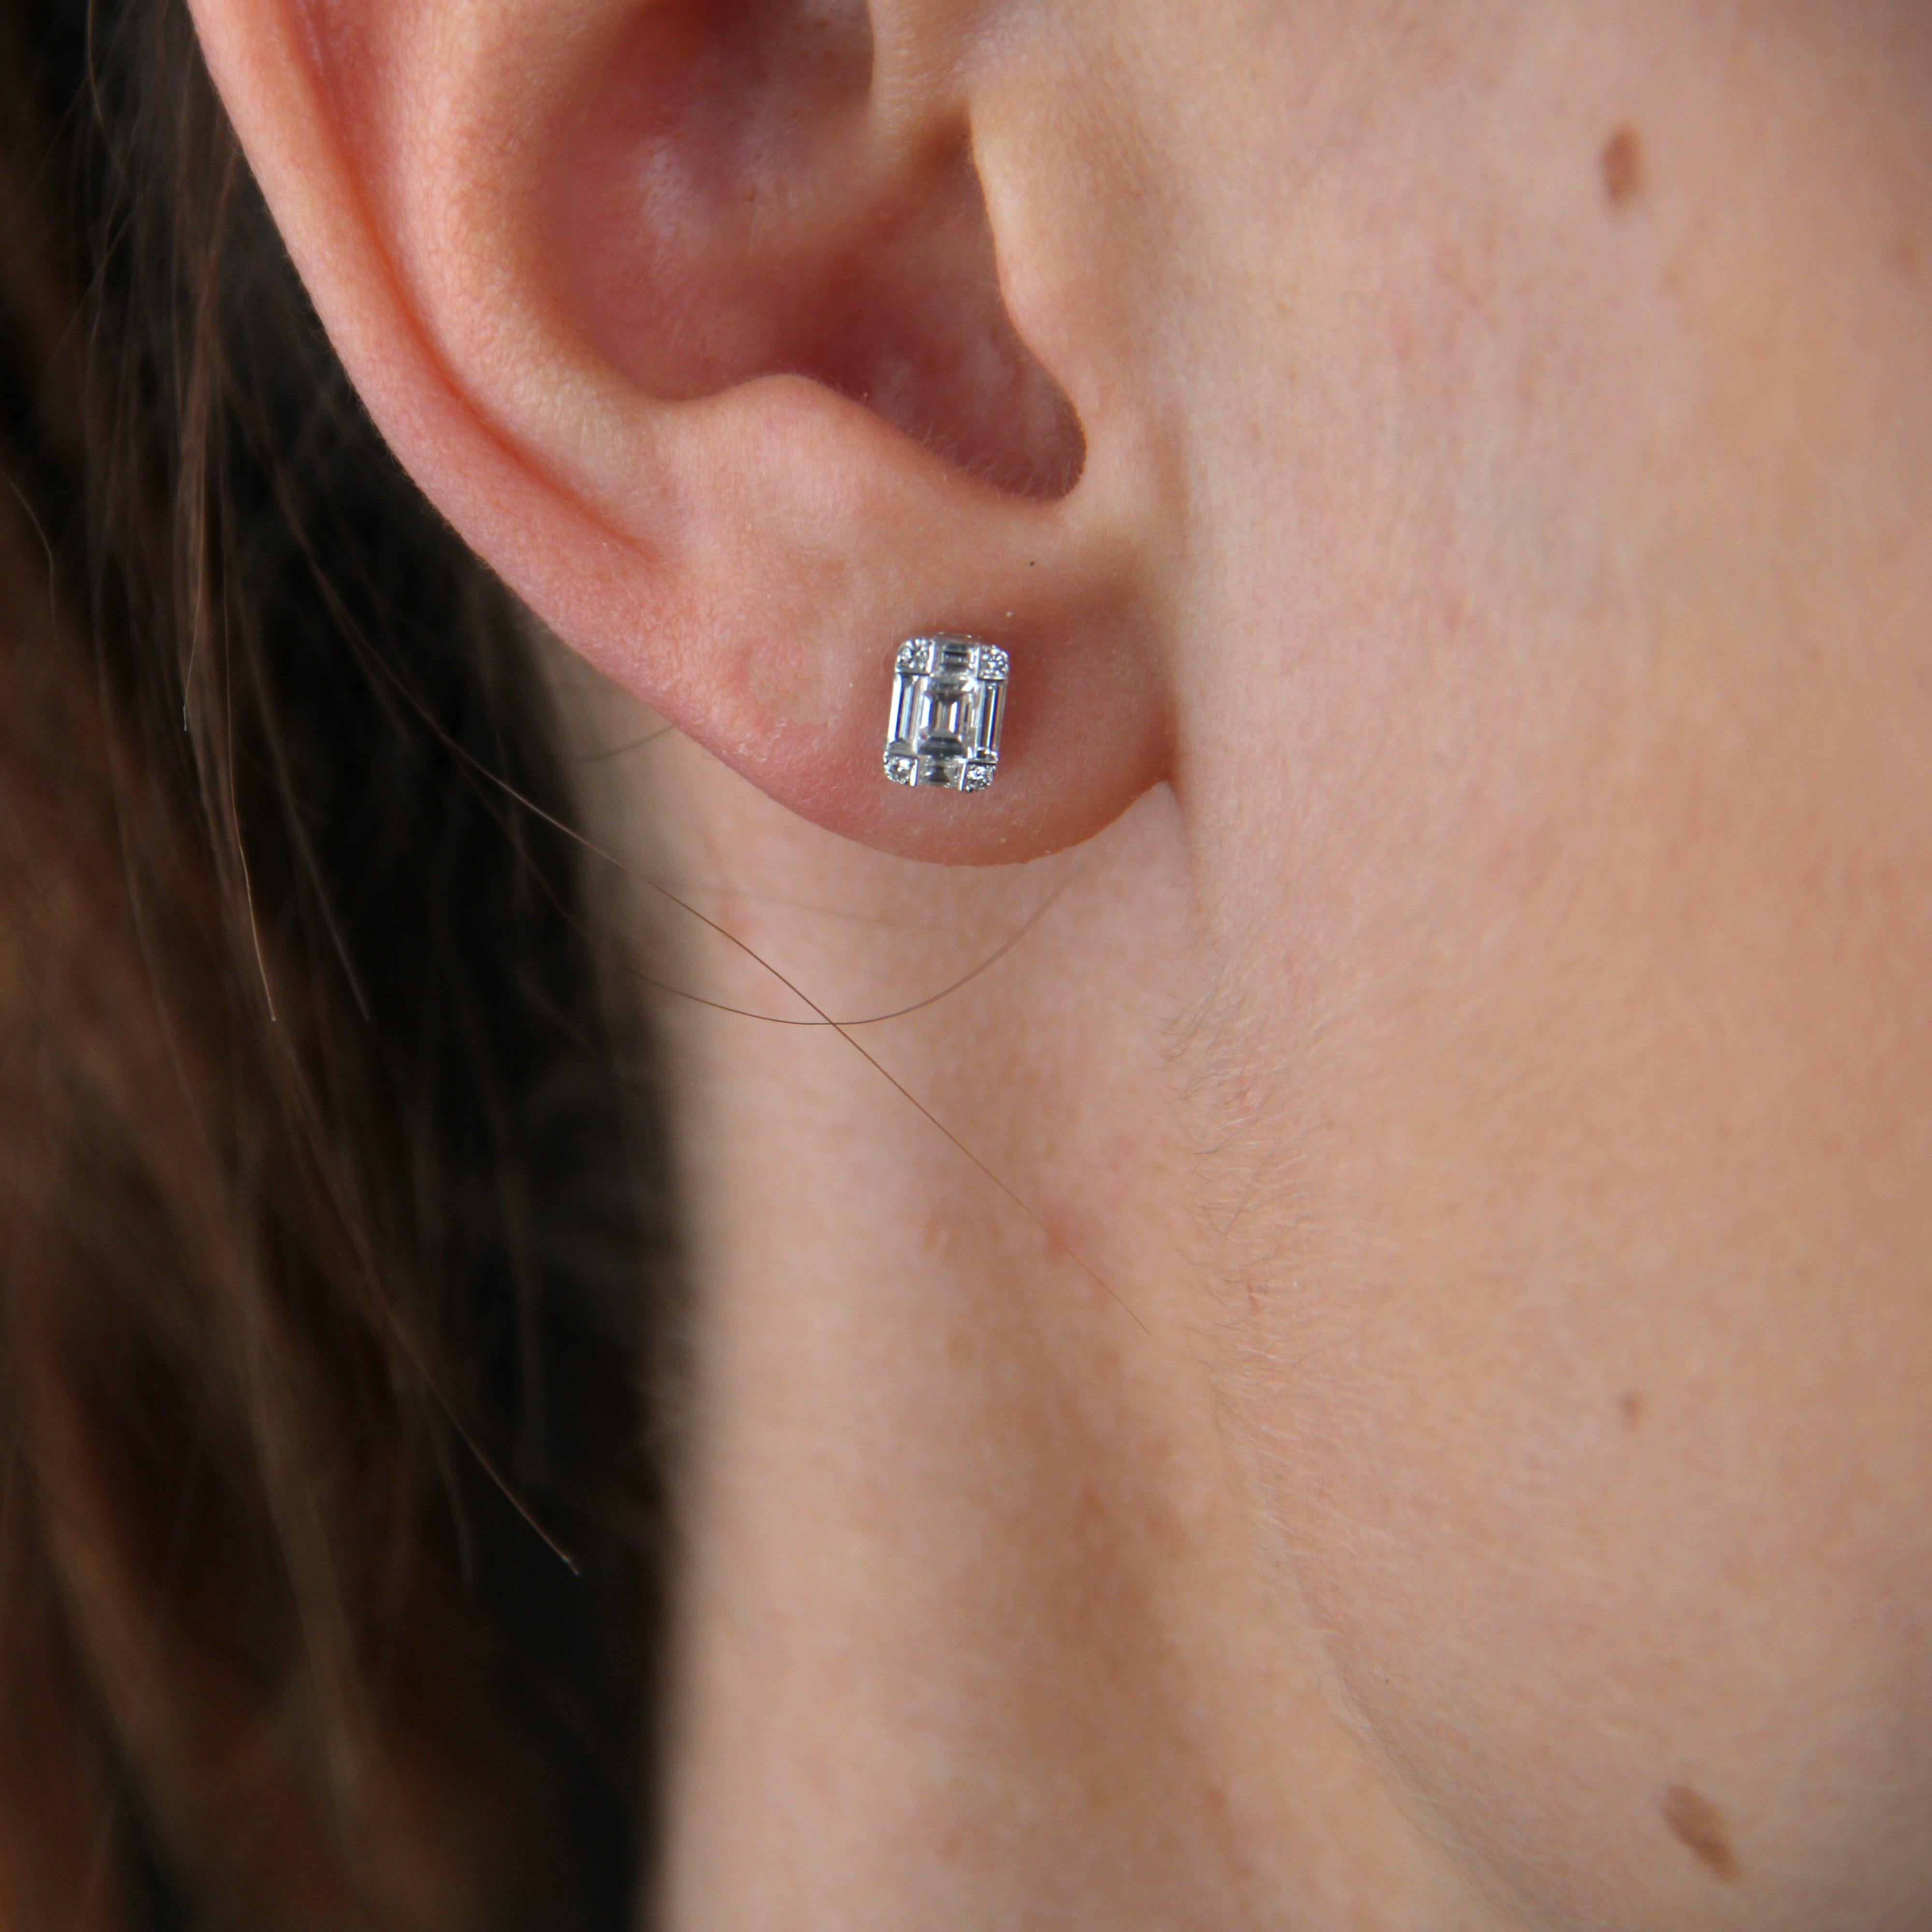 For pierced ears.
Earrings in 18 karat white gold.
Rectangular in shape, each earring is set with diamonds of different shapes: brilliant and baguette, giving the illusion of a larger emerald-cut diamond. The fastening system is a butterfly.
Total